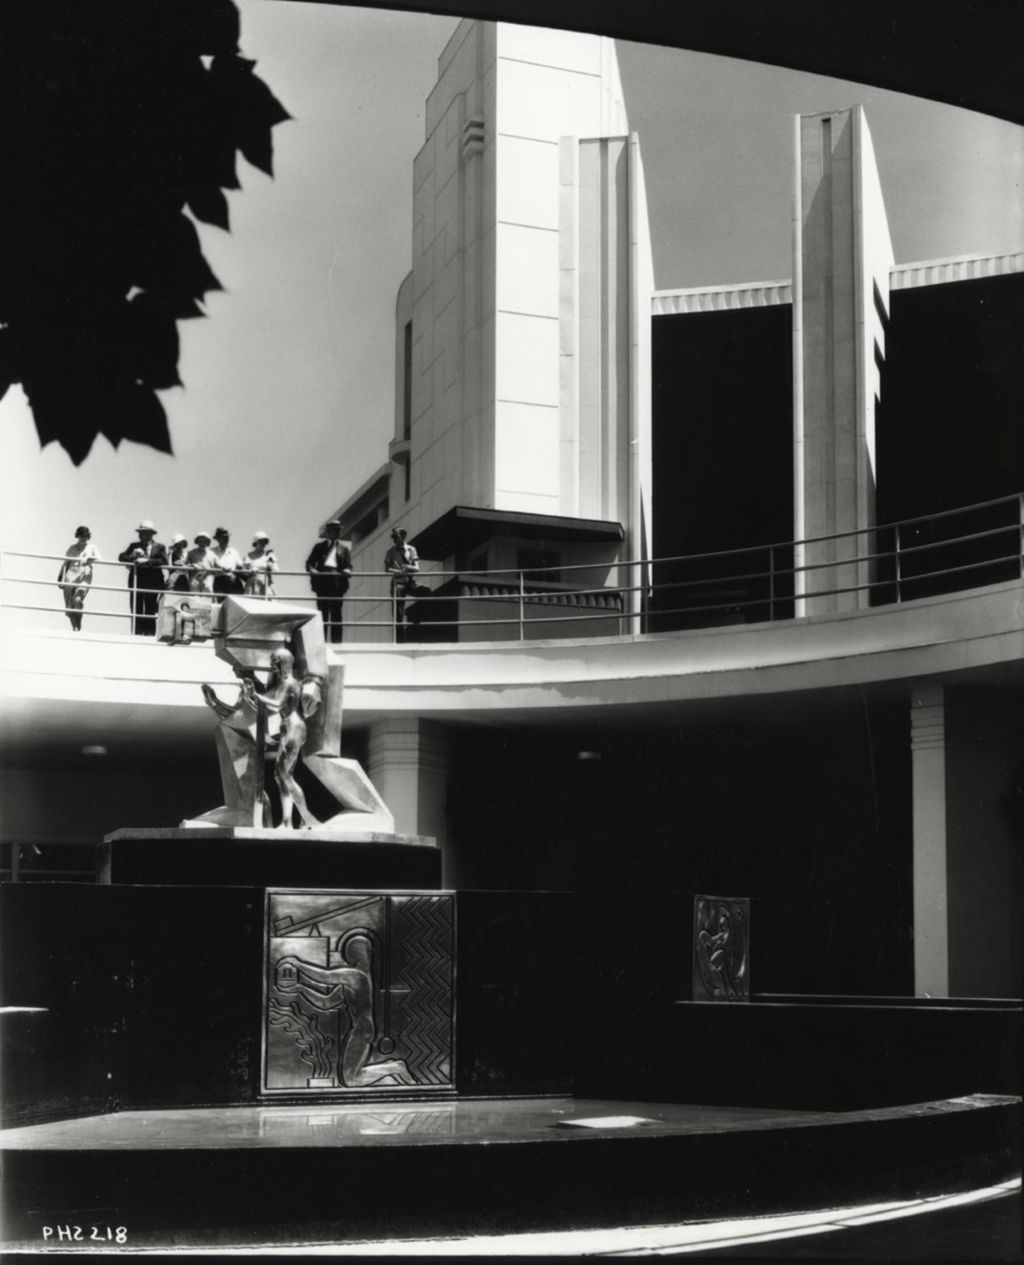 Miniature of View of the Hall of Science fountain and the Fountain of Science sculpture